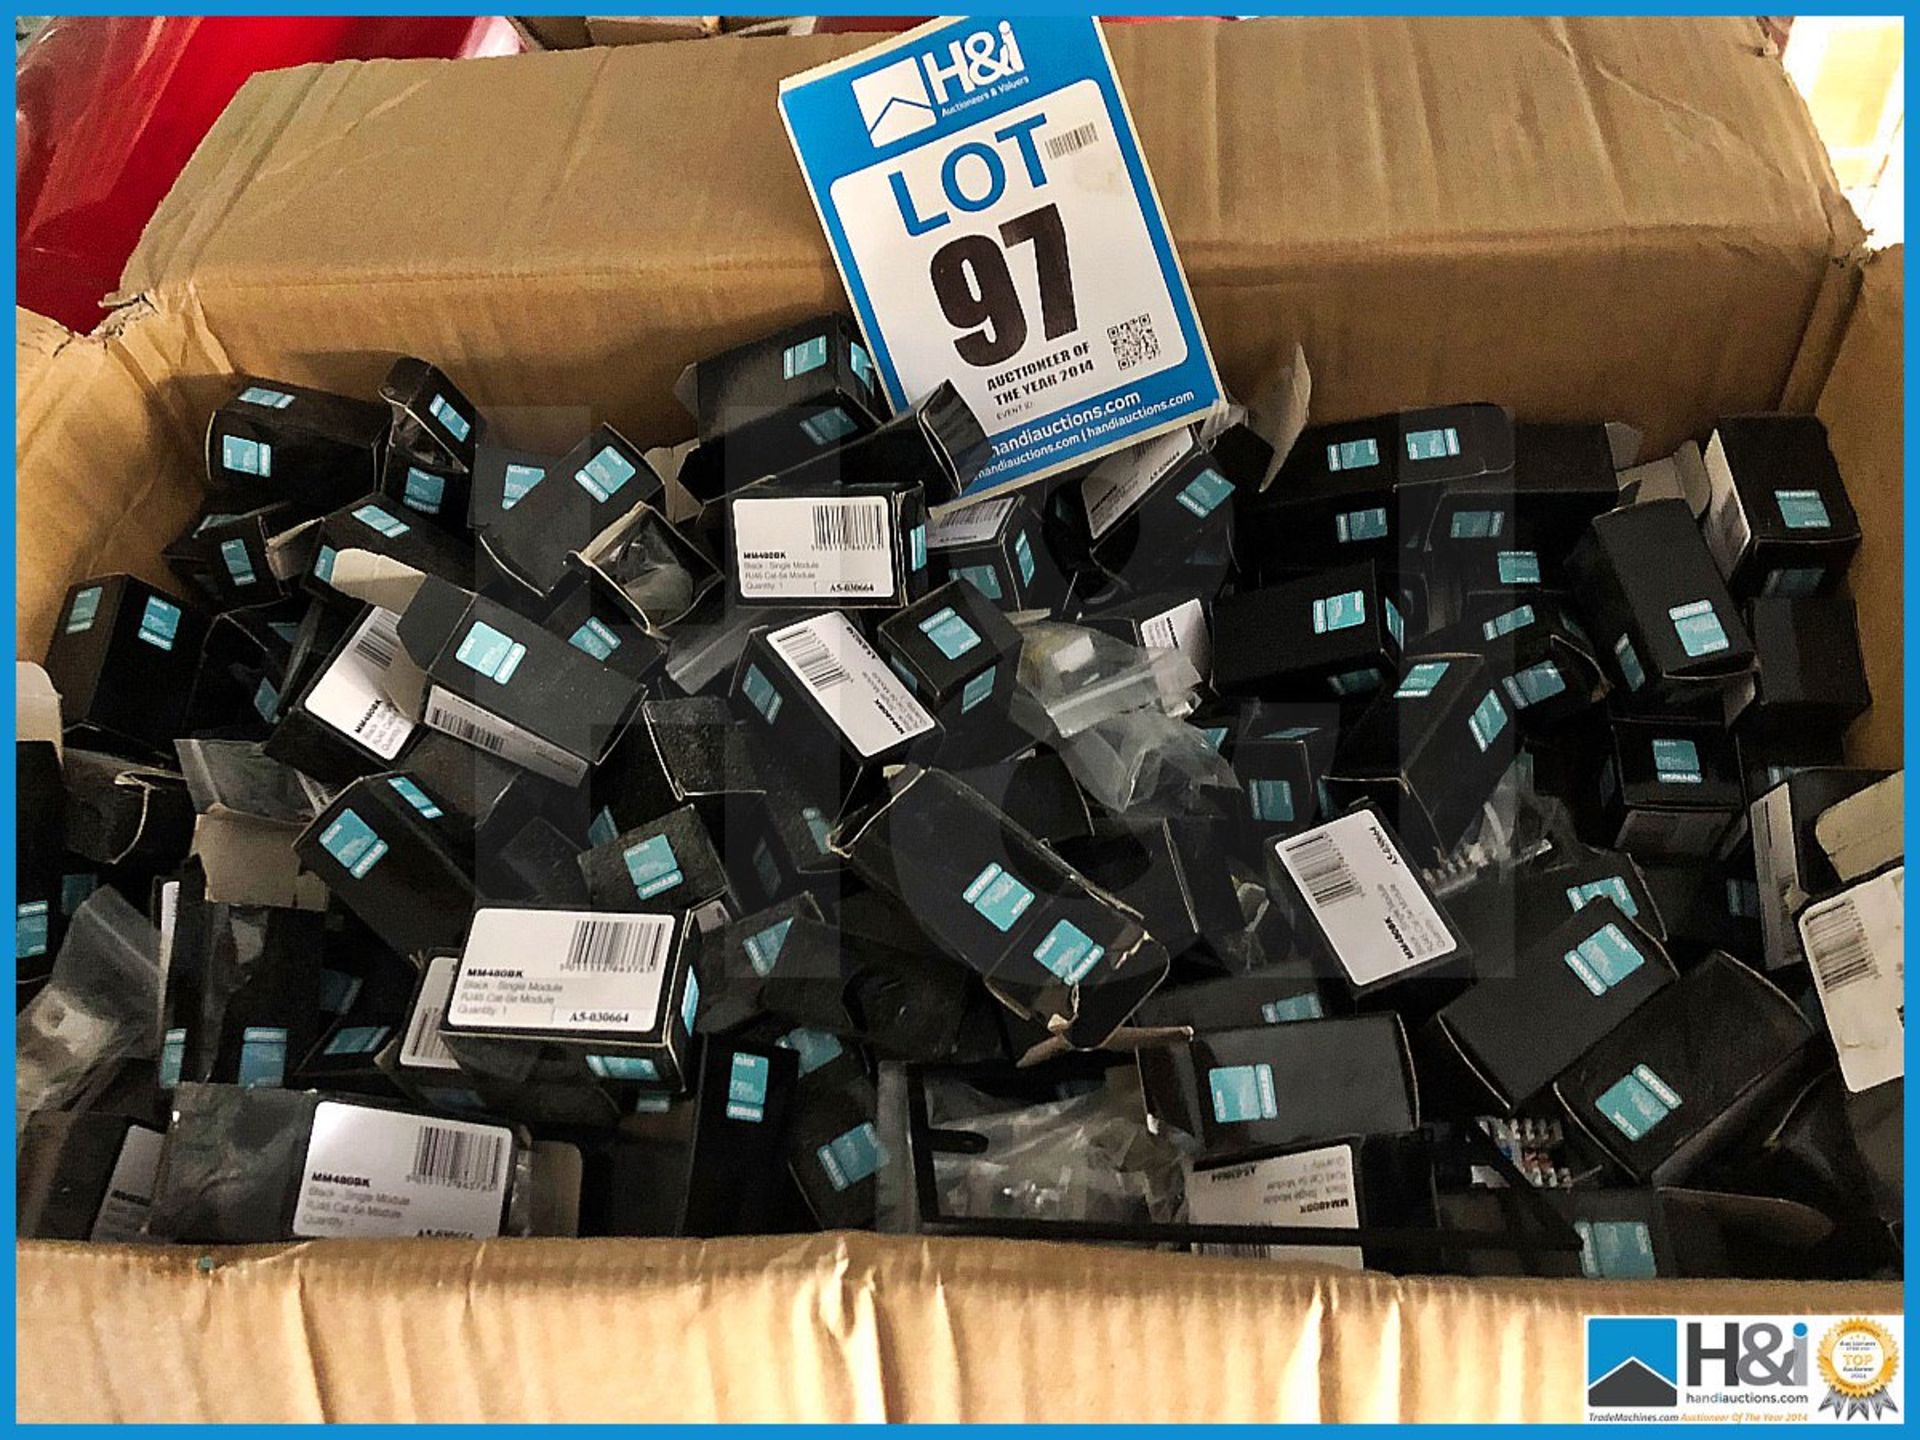 Large quantity of Click New Media RJ45 Cat 5e modules. New and boxed. RRP GBP 4.90 each. Well over 1